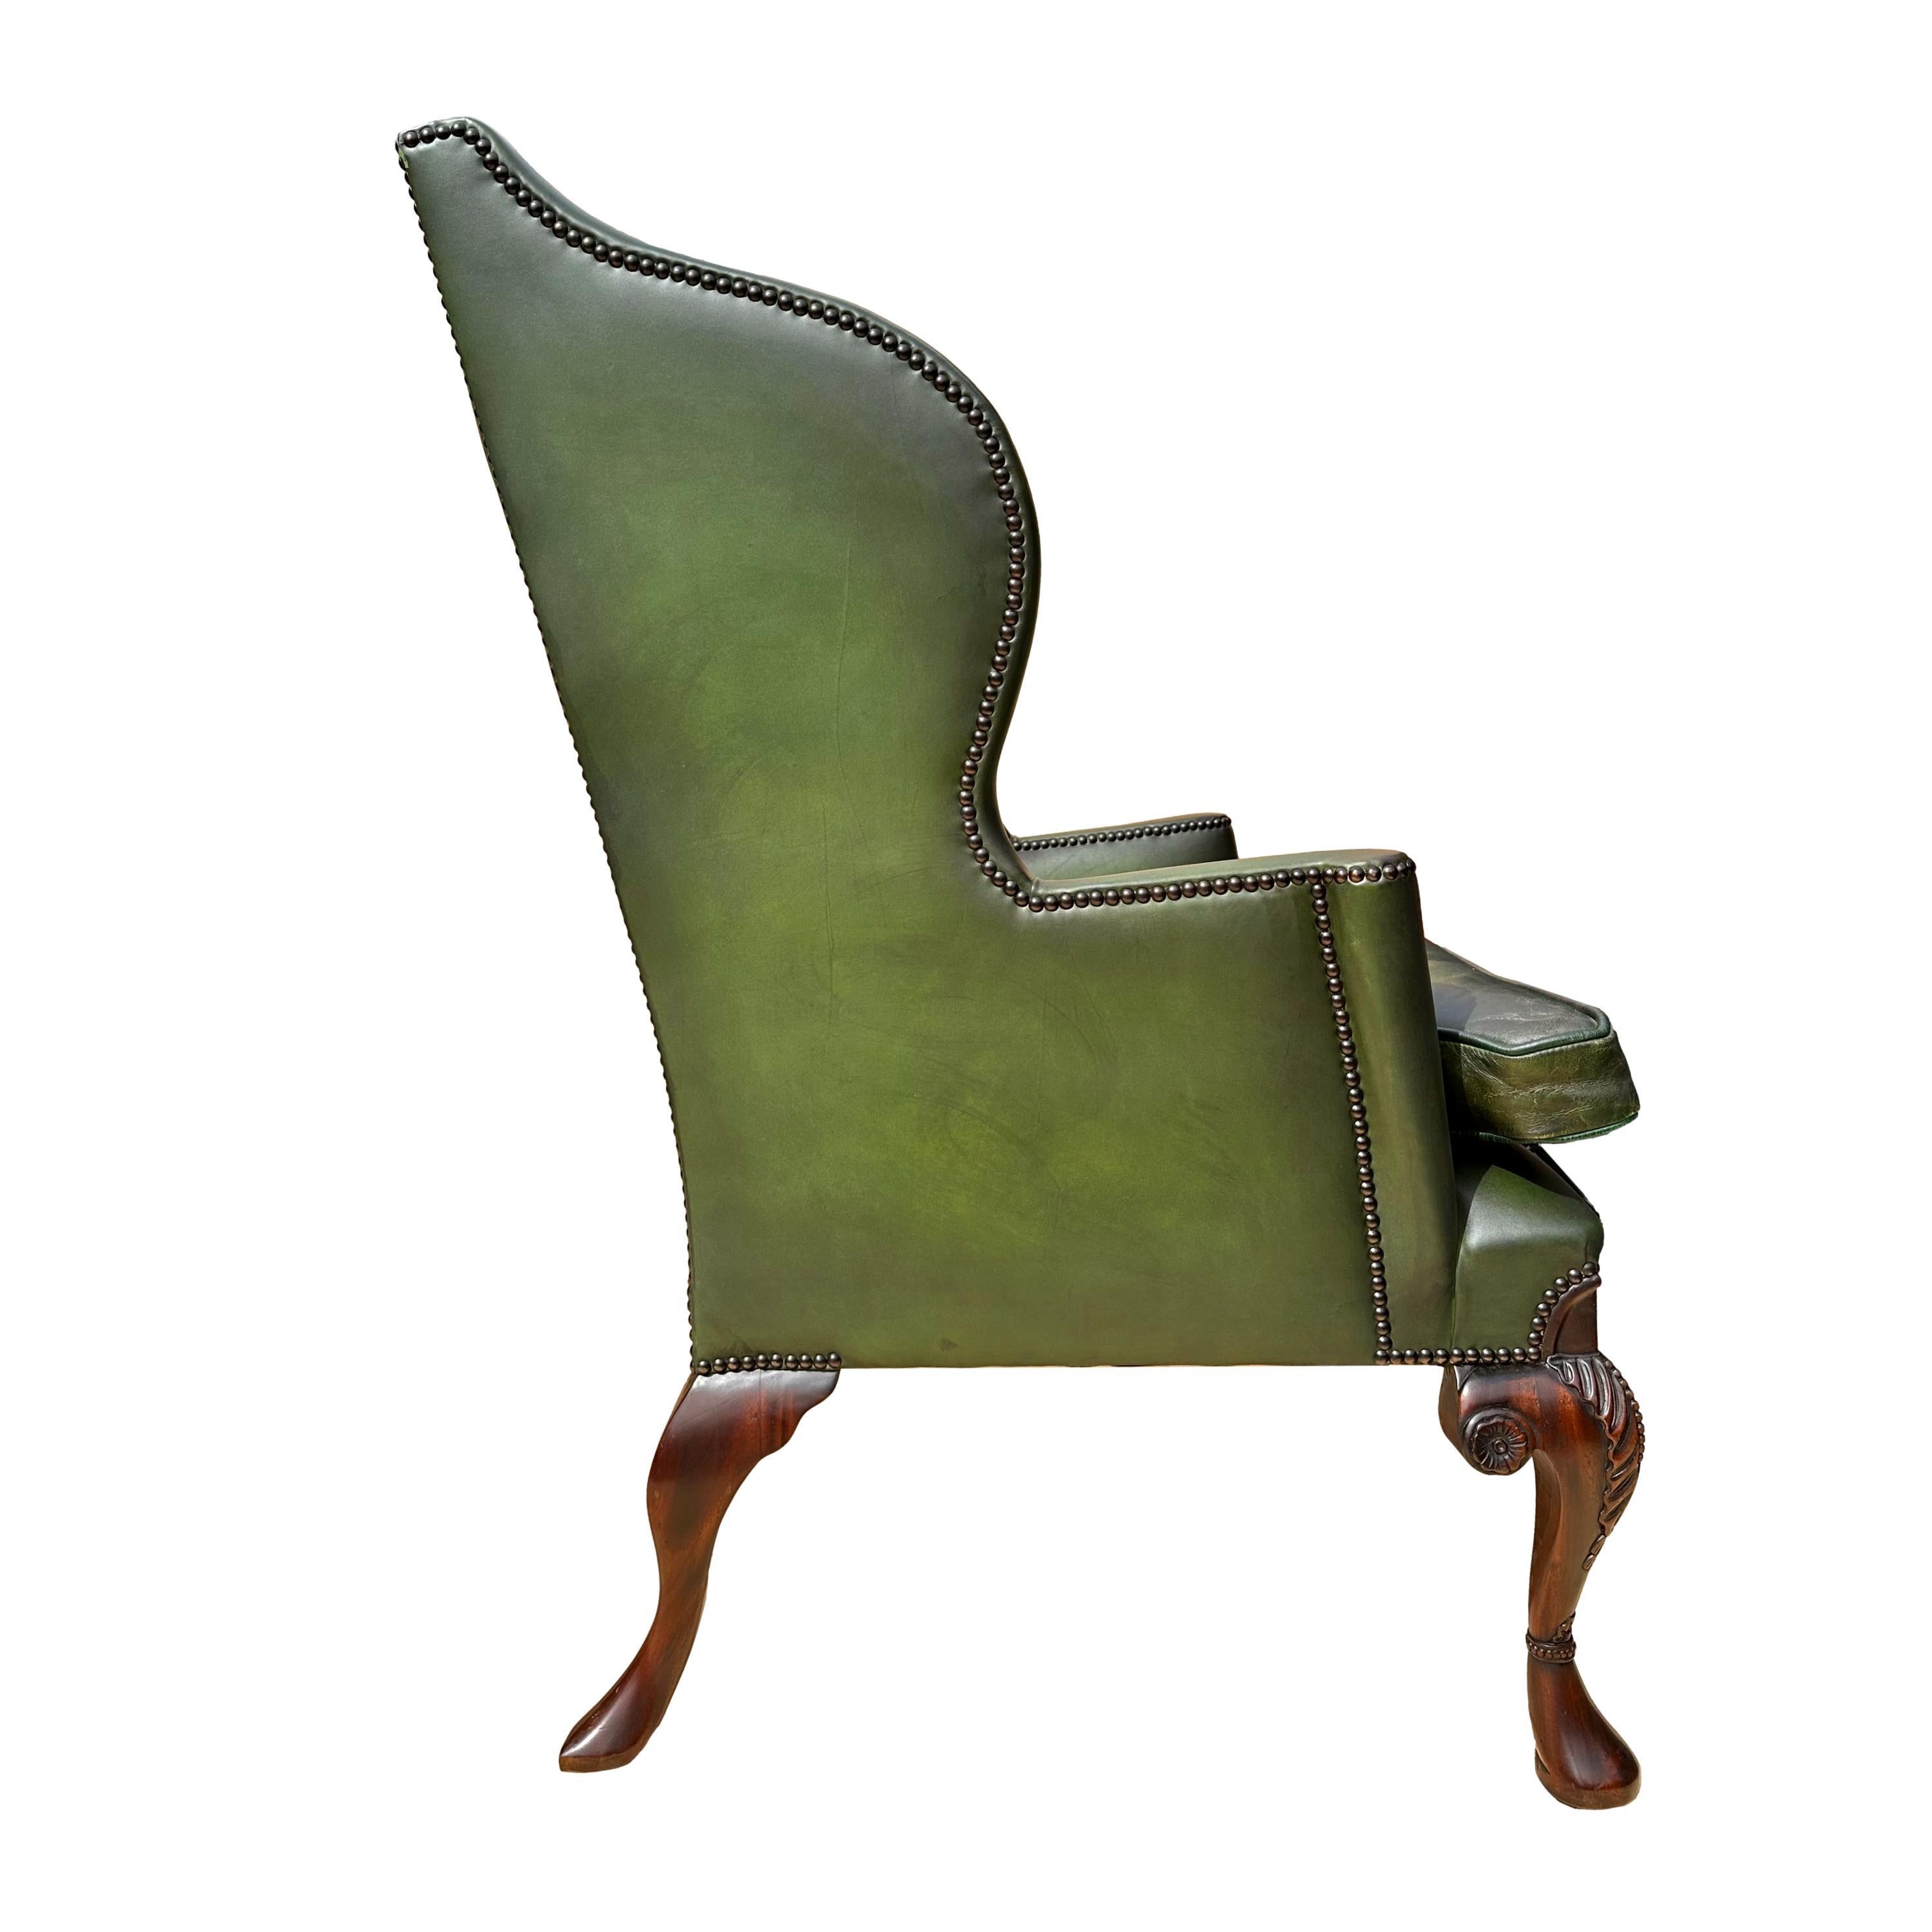 Pair of Edwardian Green Leather Wing Back Chairs, English, ca. 1920. For Sale 4